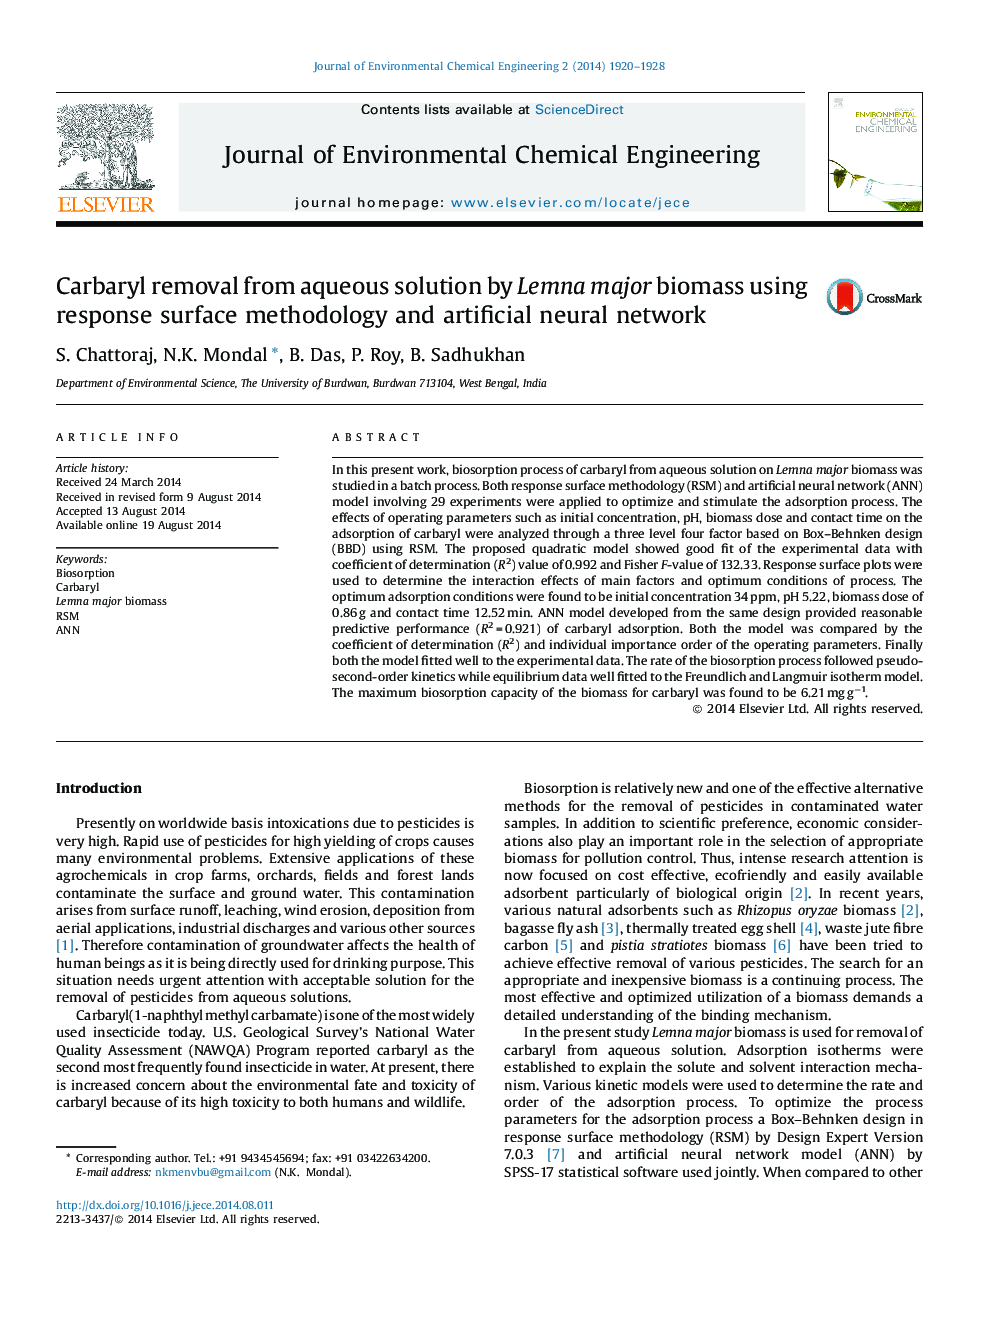 Carbaryl removal from aqueous solution by Lemna major biomass using response surface methodology and artificial neural network